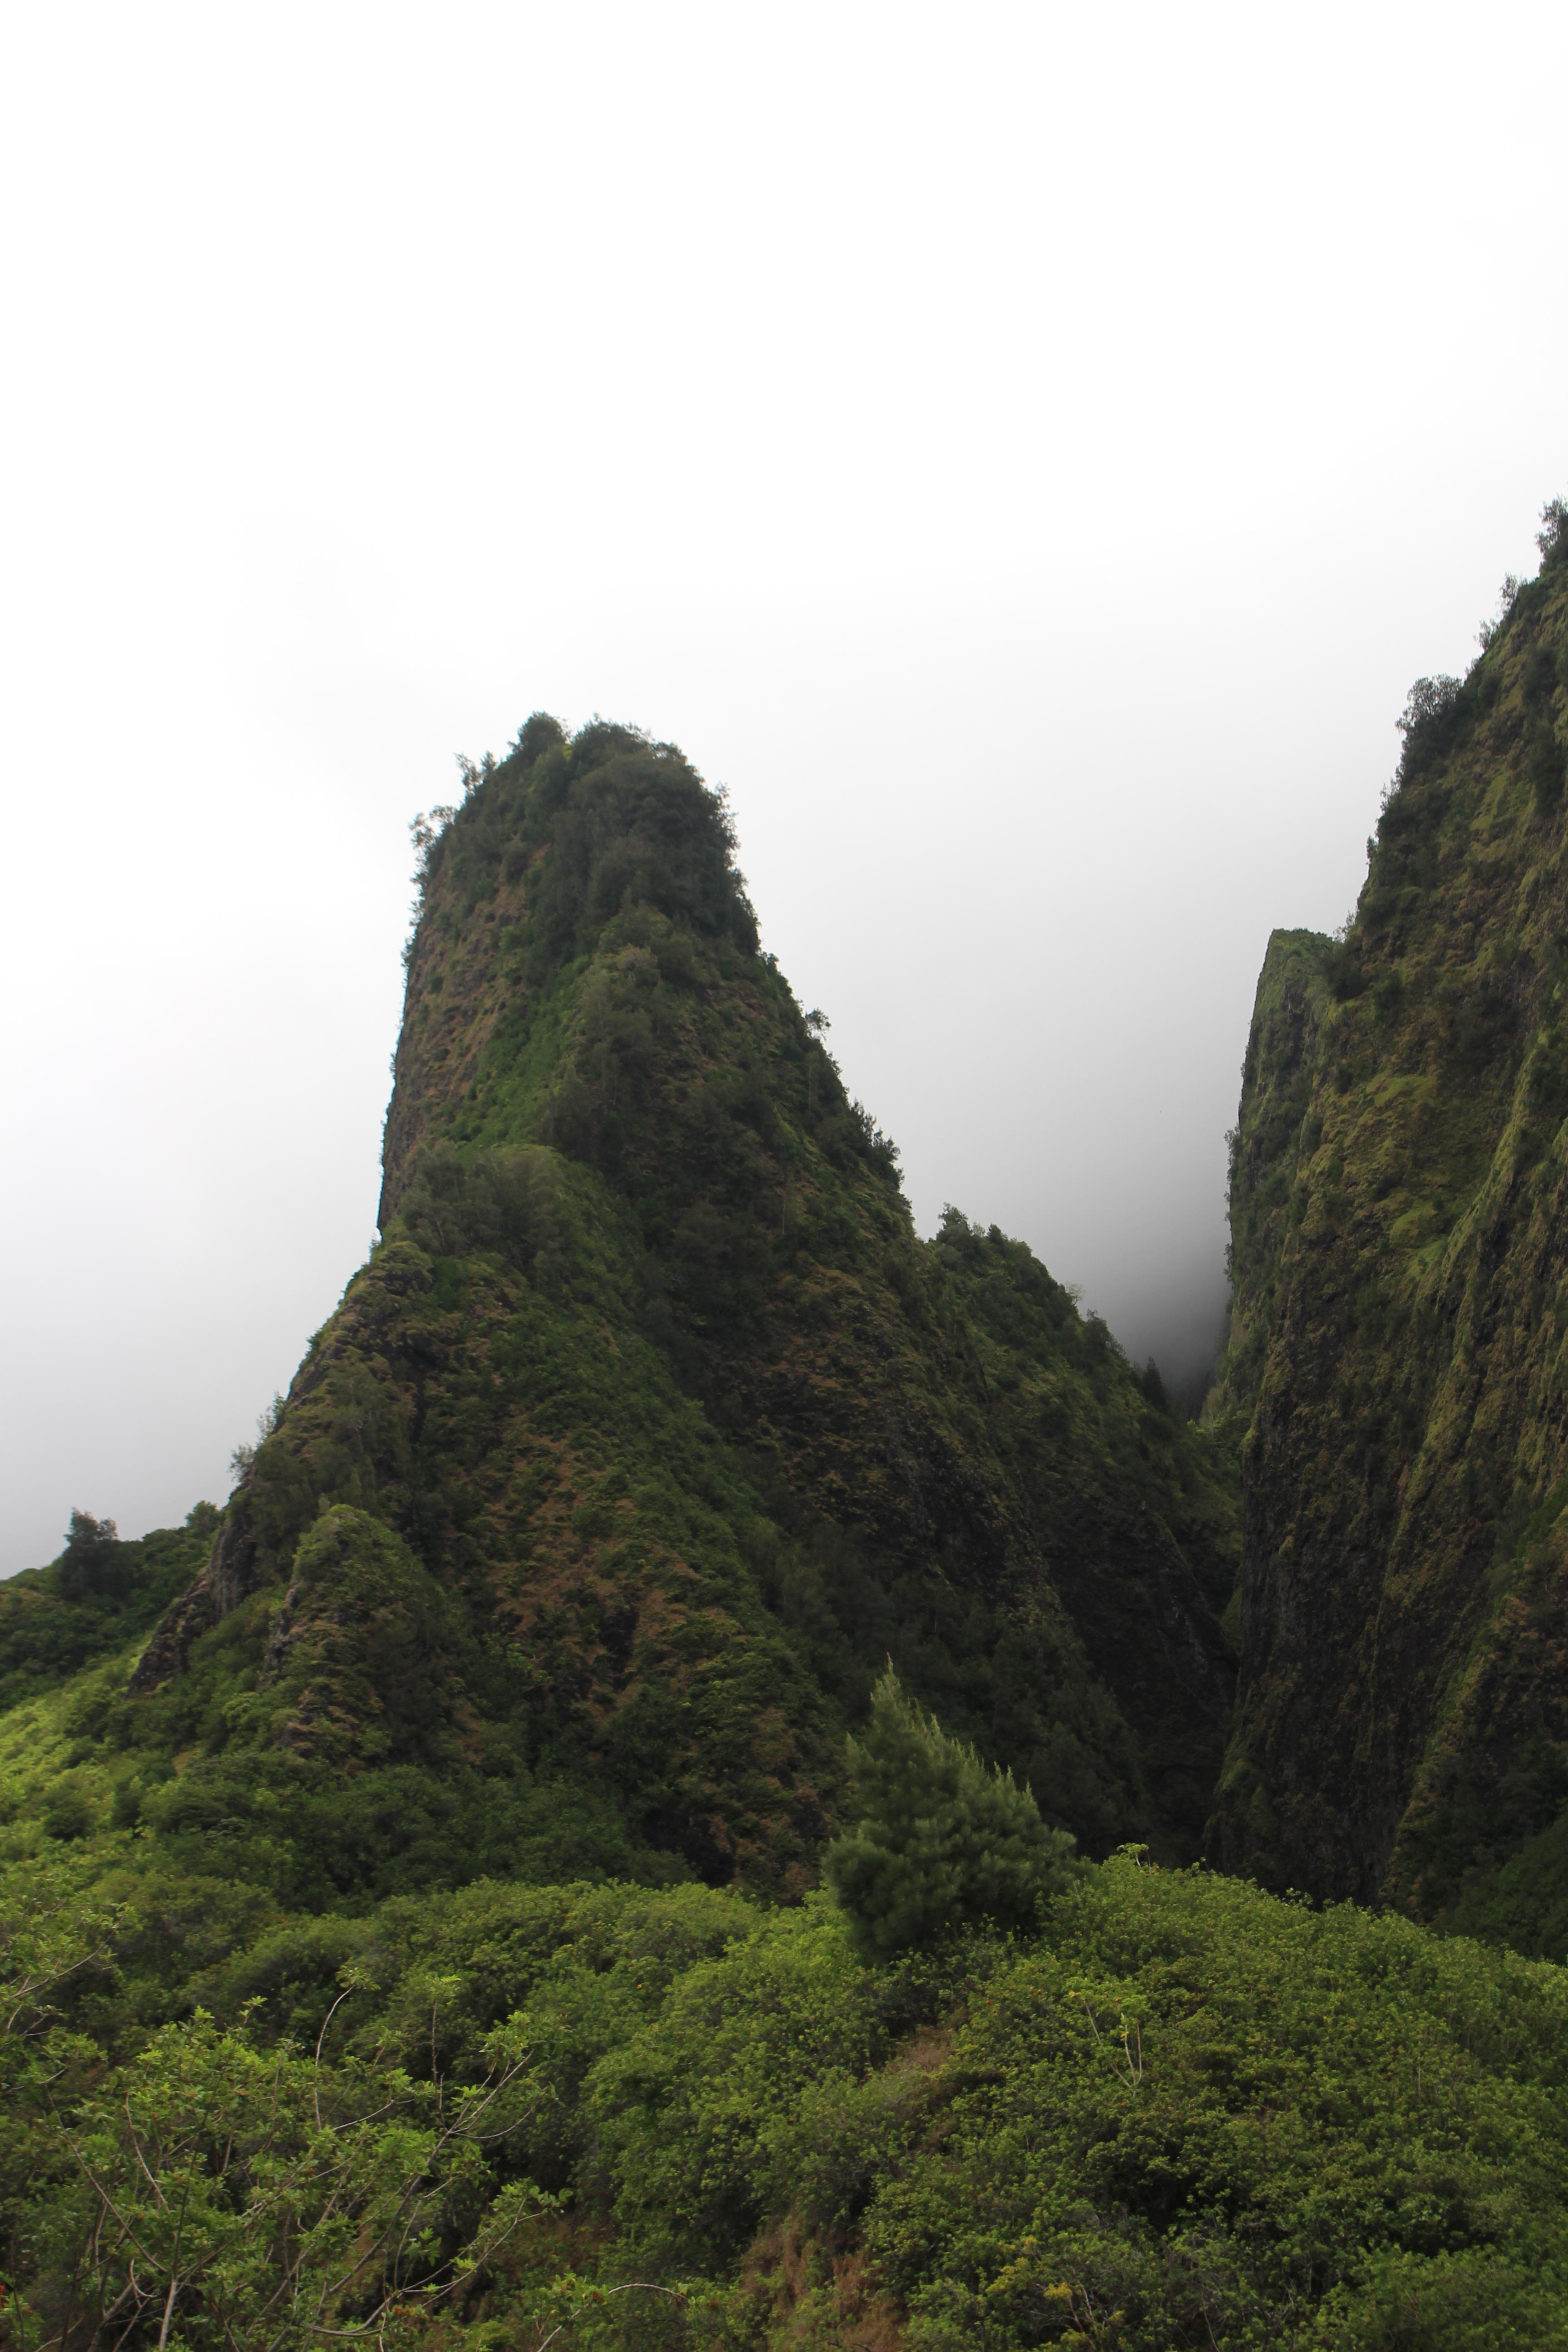 Iao Valley State Monument and Maui